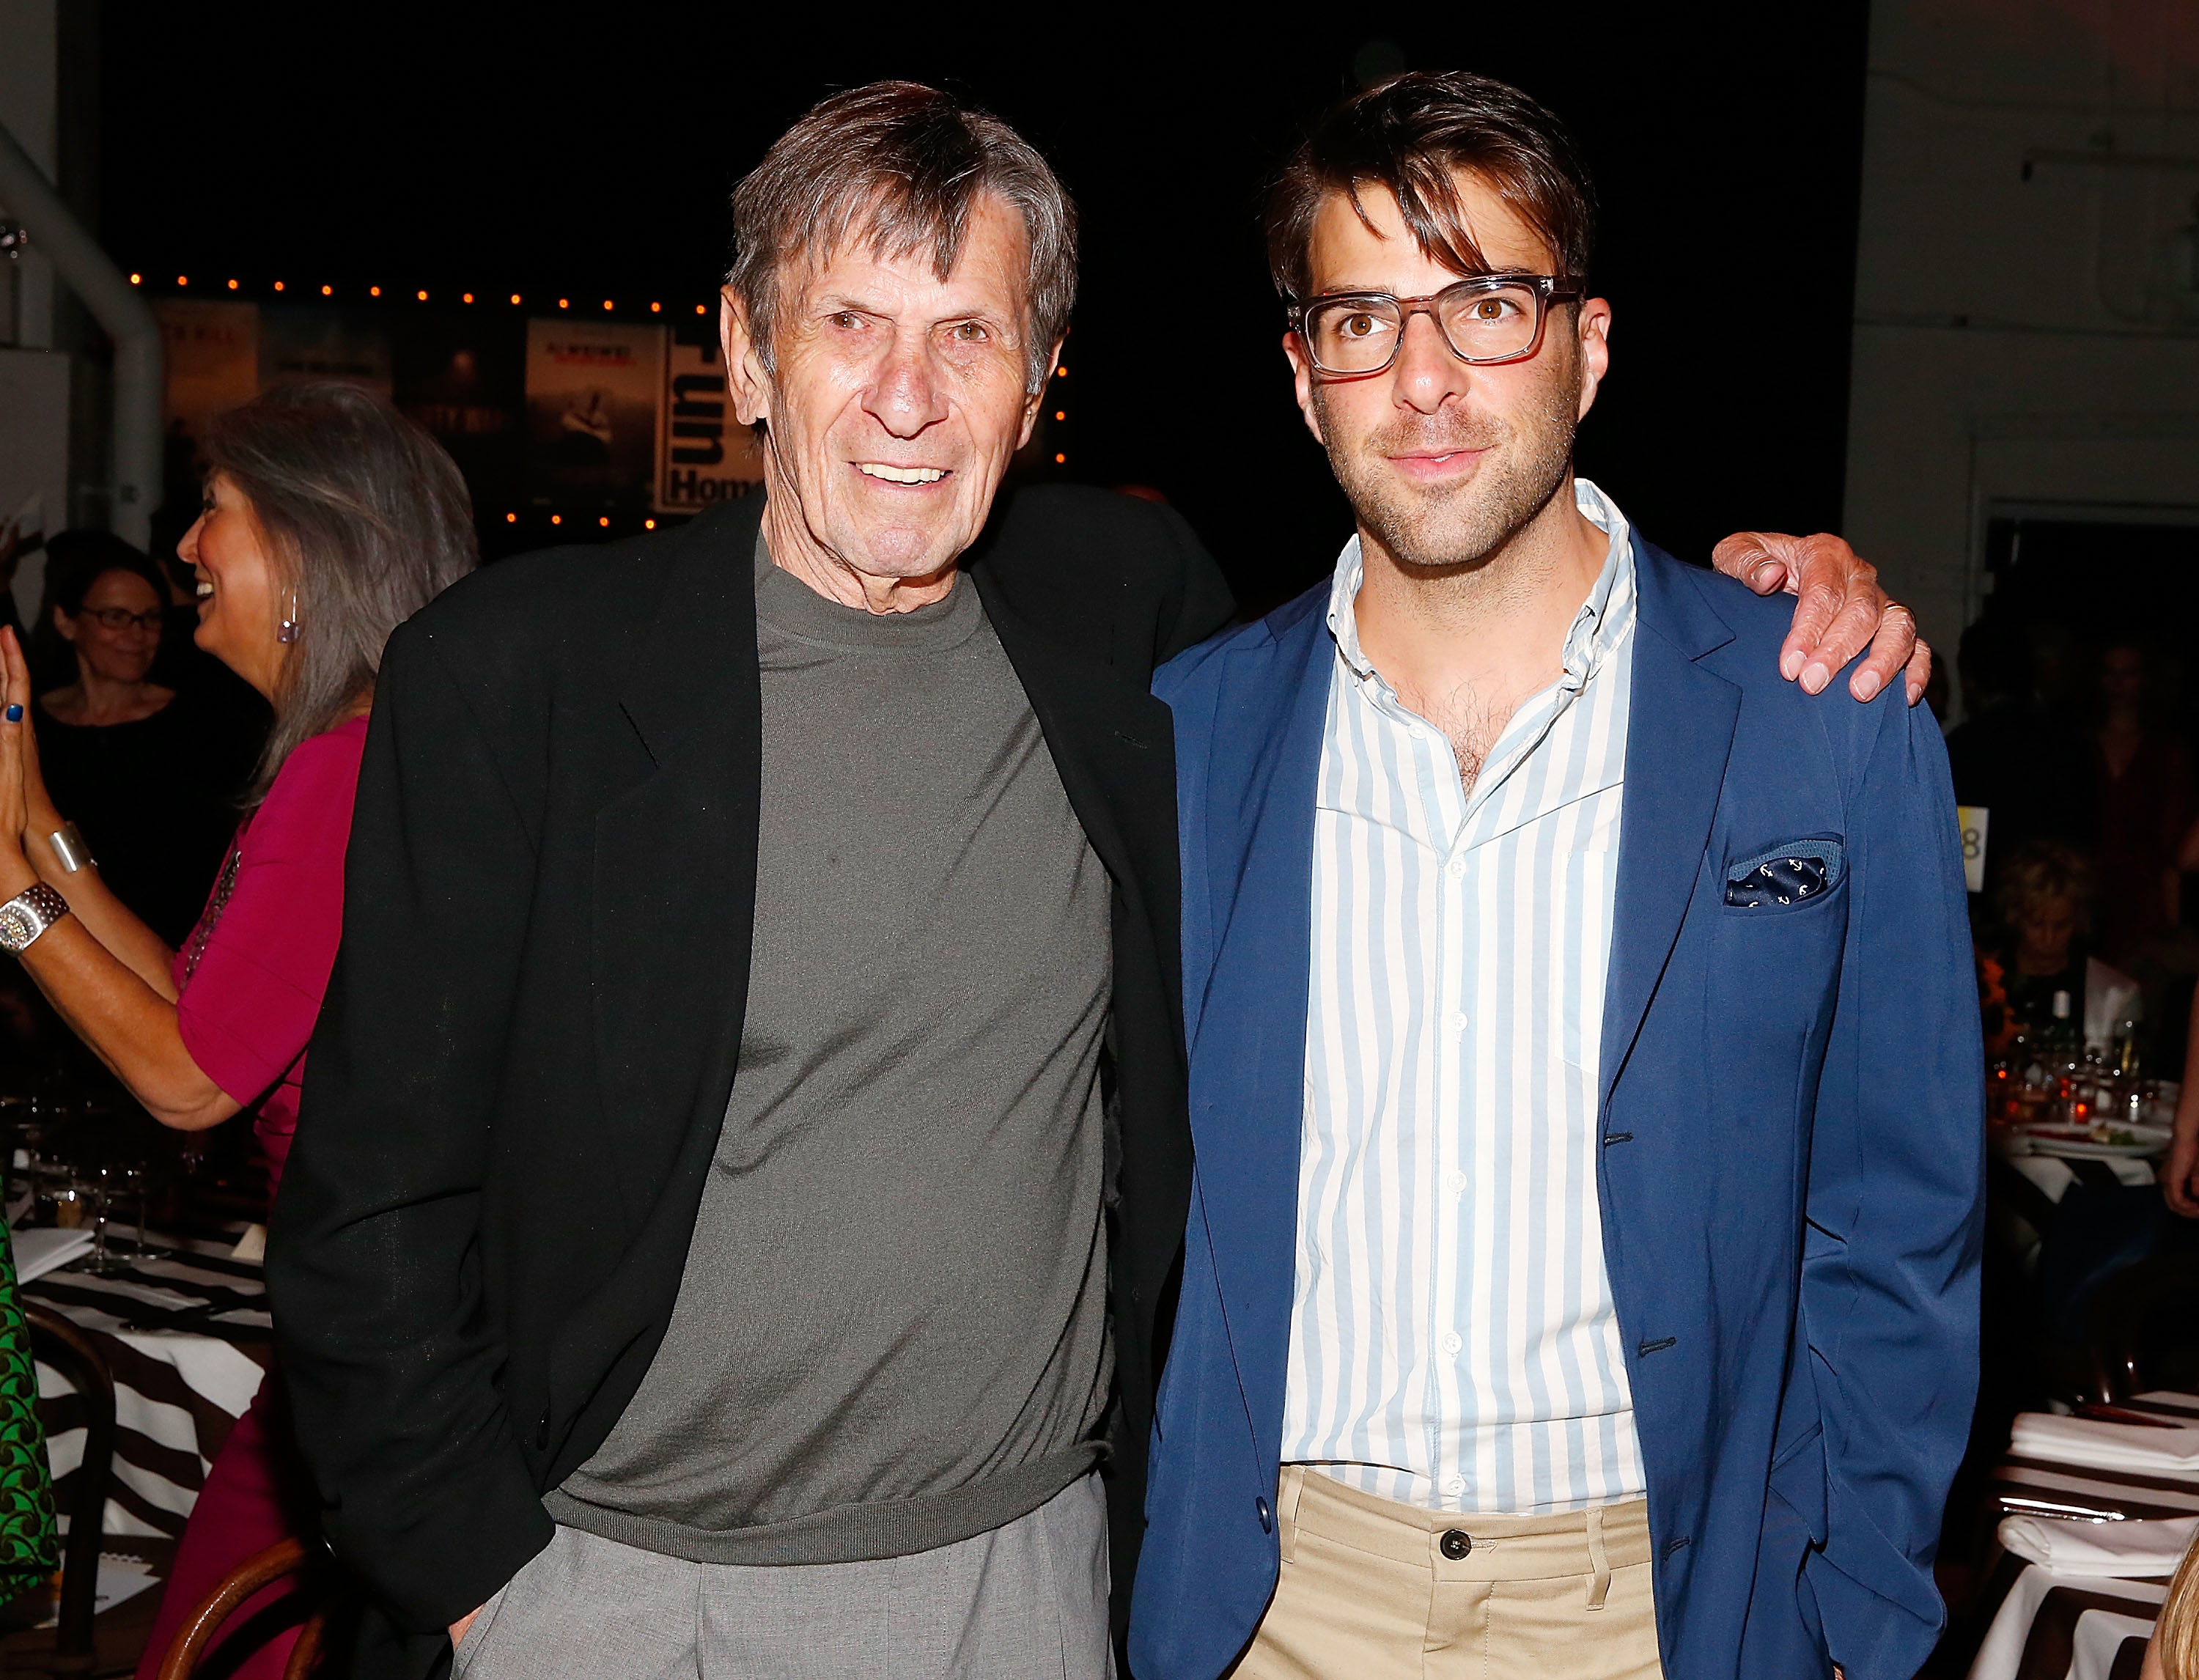 Actors Leonard Nimoy and Zachary Quinto attend the Sundance Institute Vanguard Leadership Award on June 4, 2014 in New York City.